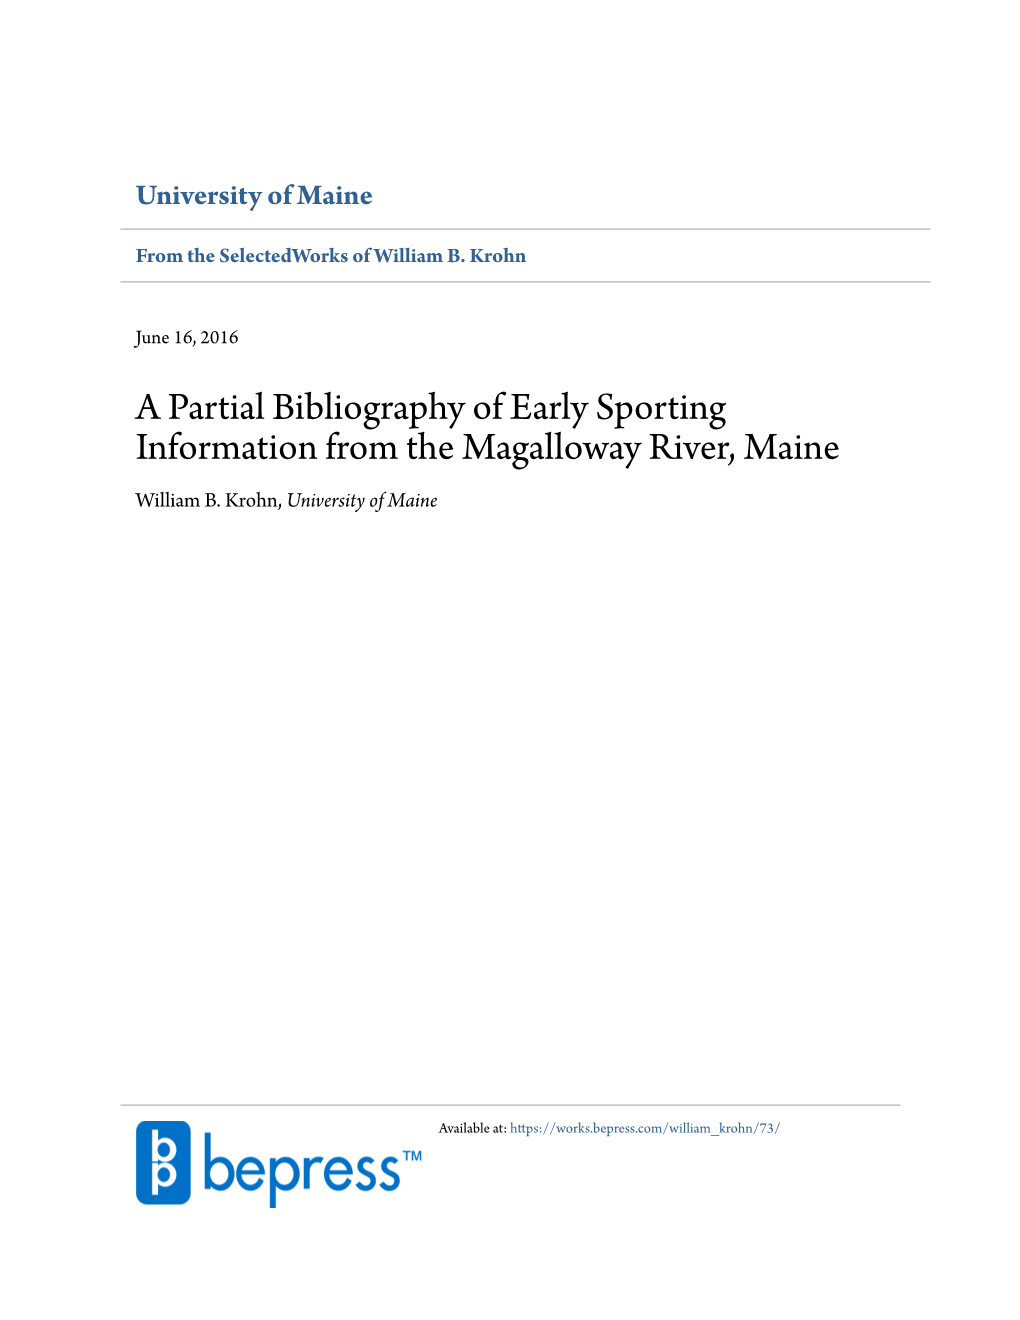 A Partial Bibliography of Early Sporting Information from the Magalloway River, Maine William B